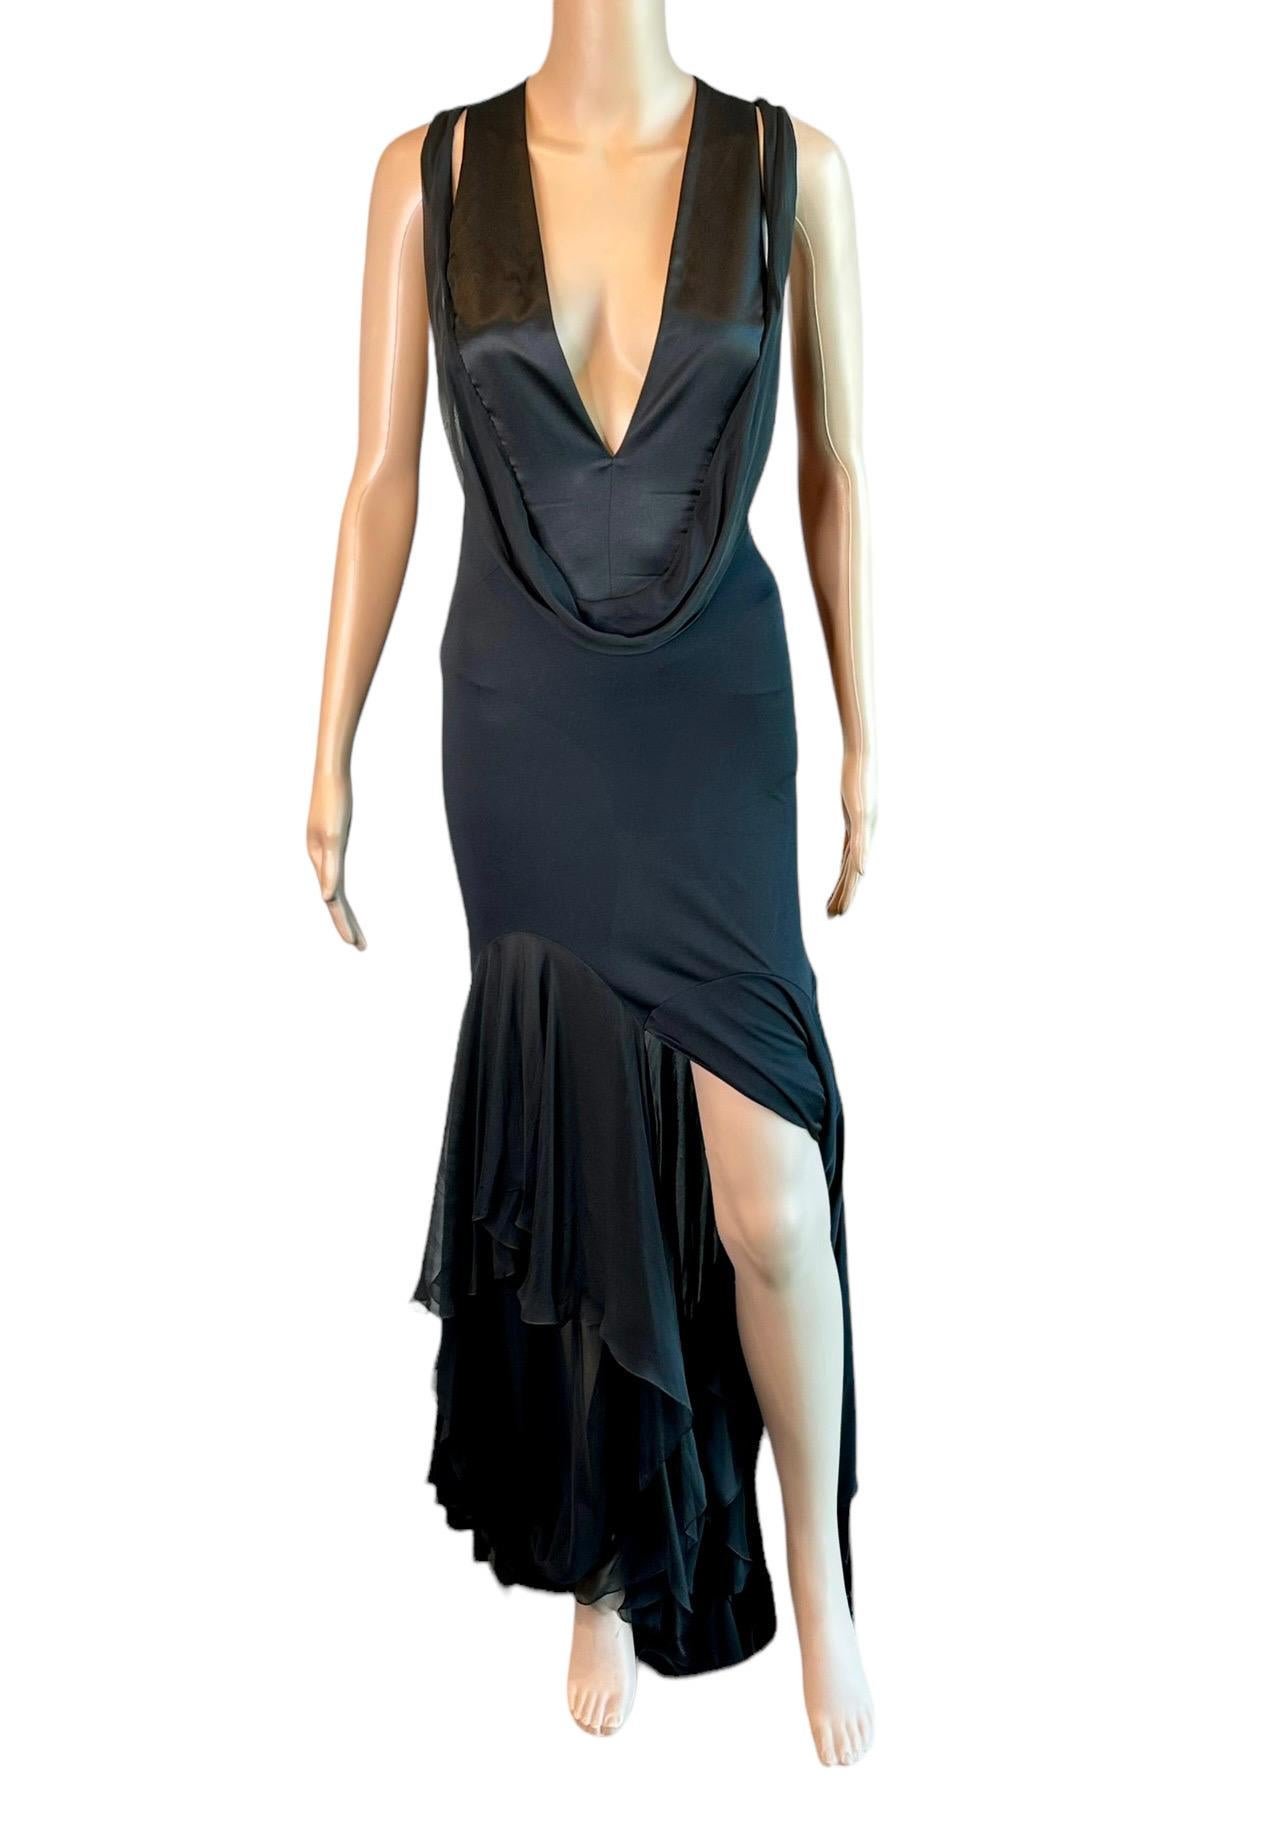 Versace S/S 2004 Plunged Halter Open Back Ruffles Black Evening Dress Gown  For Sale 1